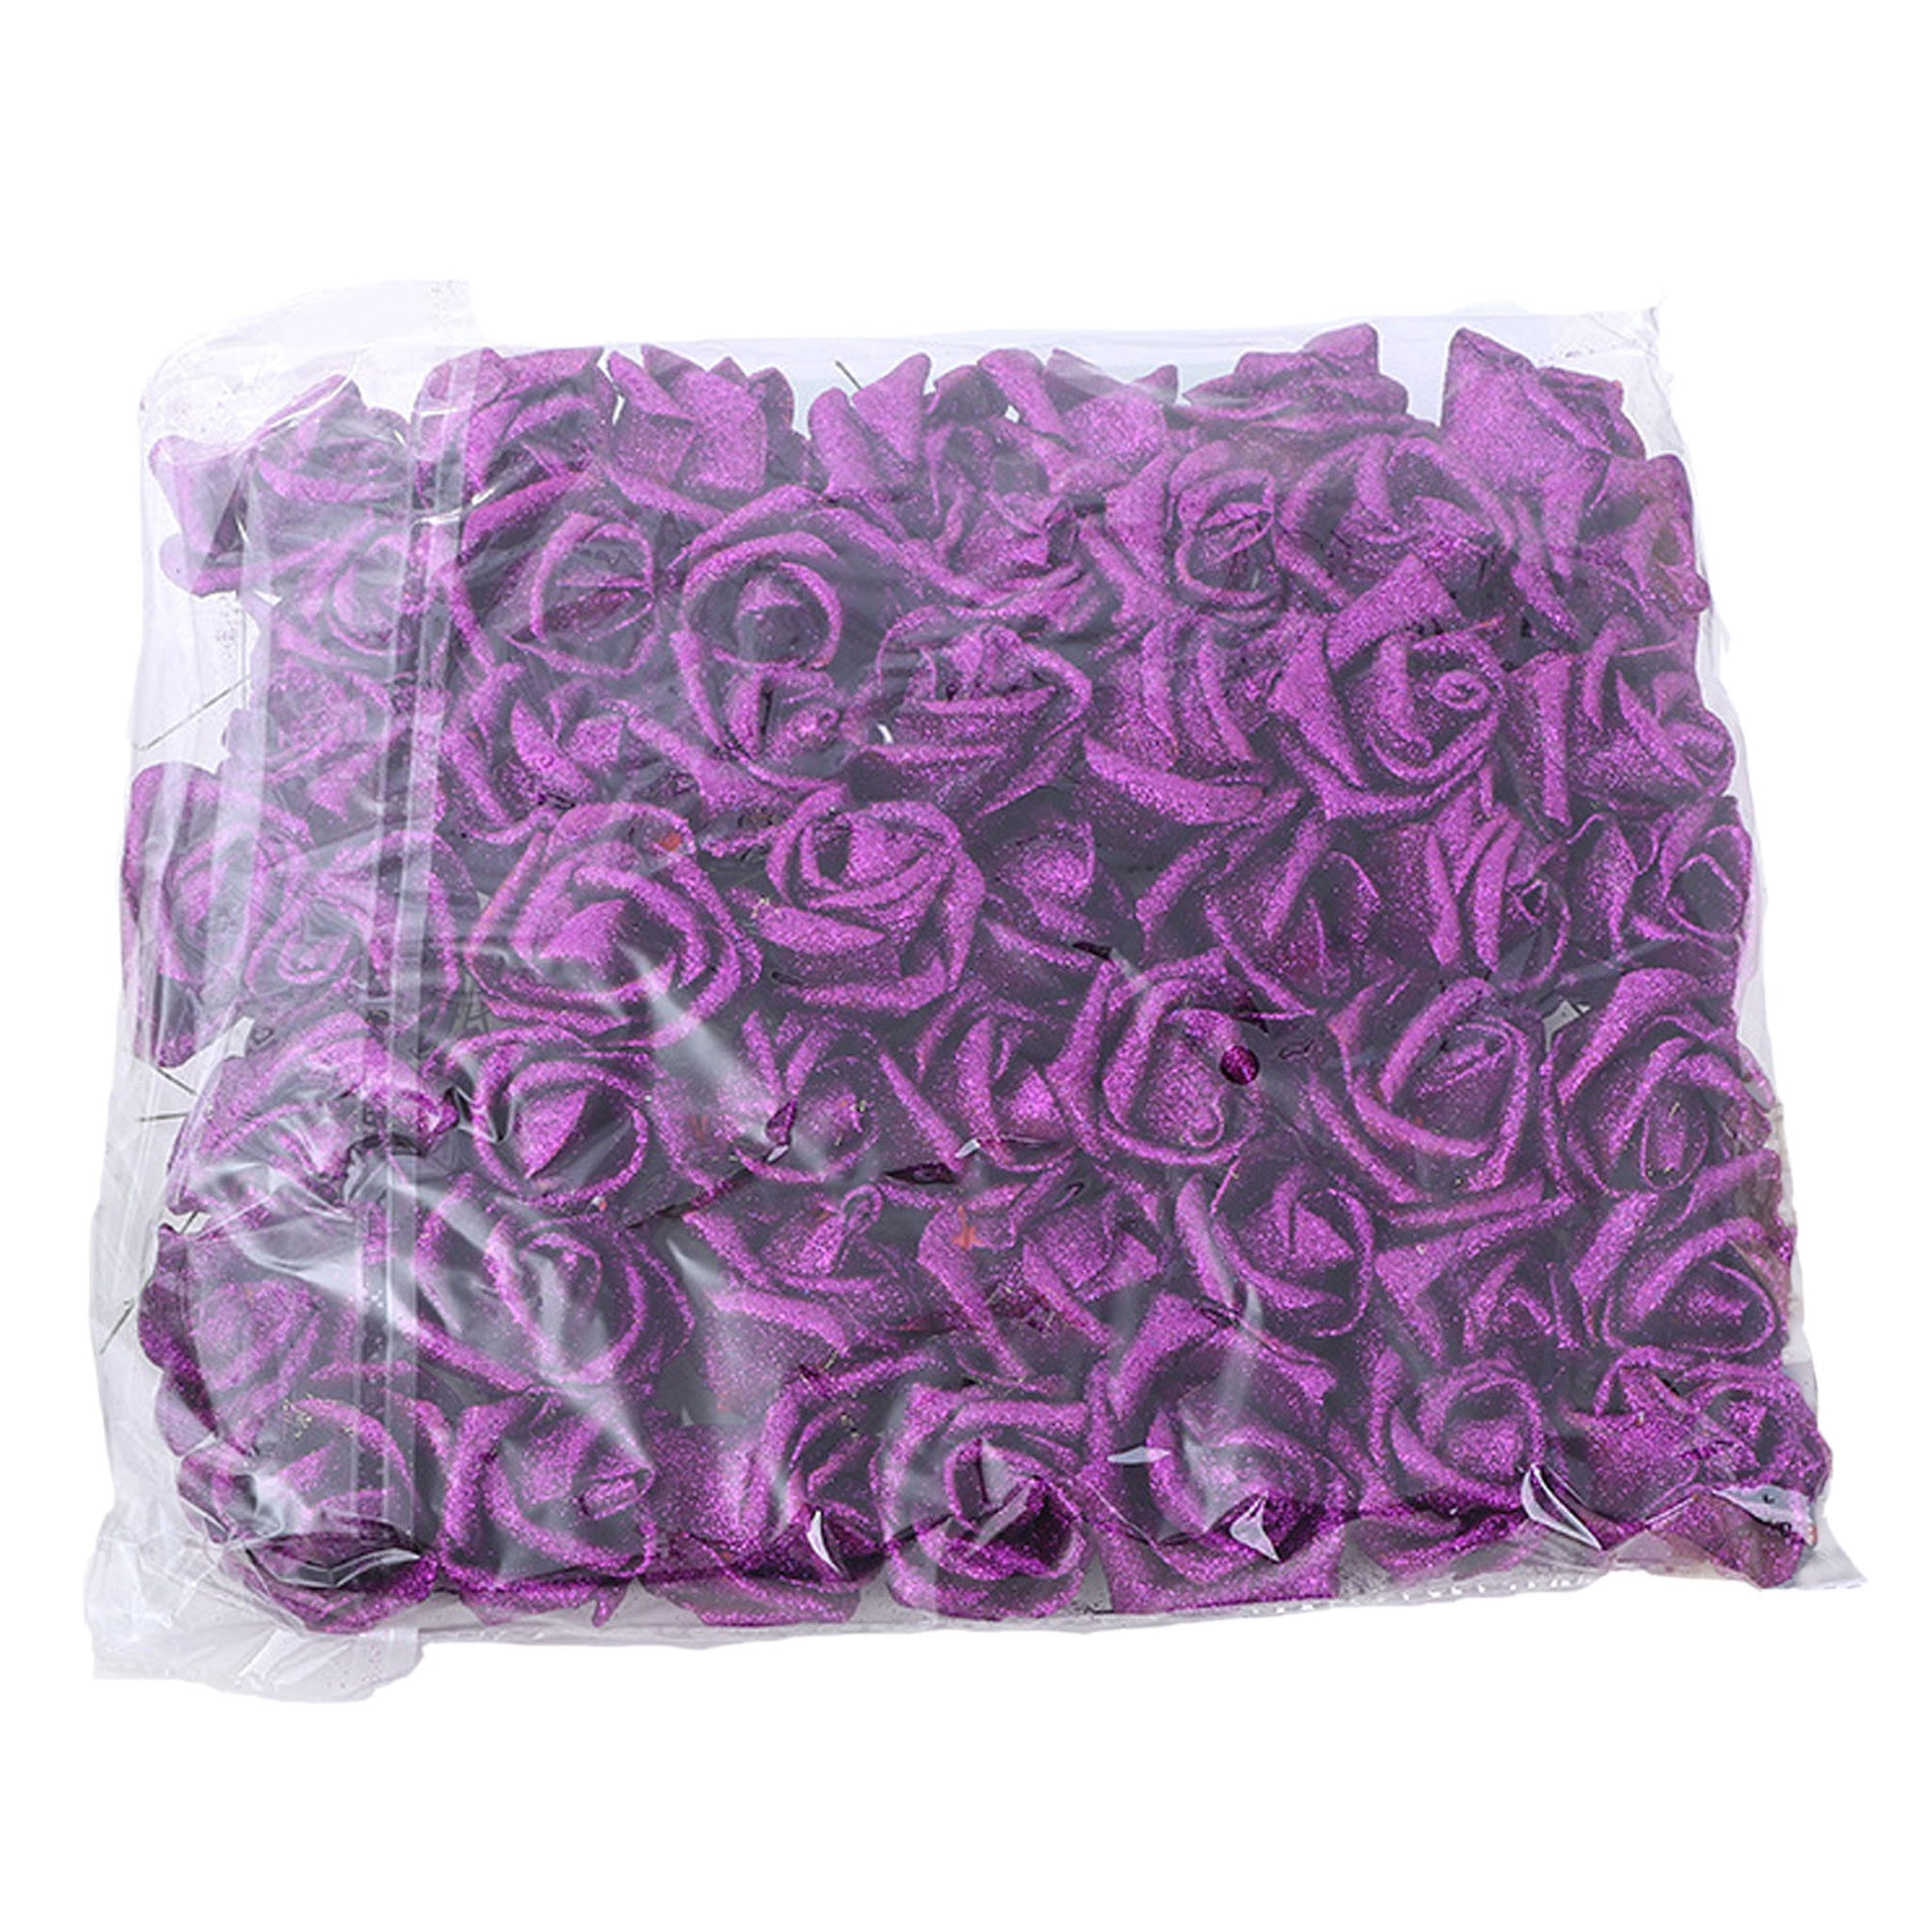 Glitter Flowers Fake Roses 50 Gold Silver Pink Purple